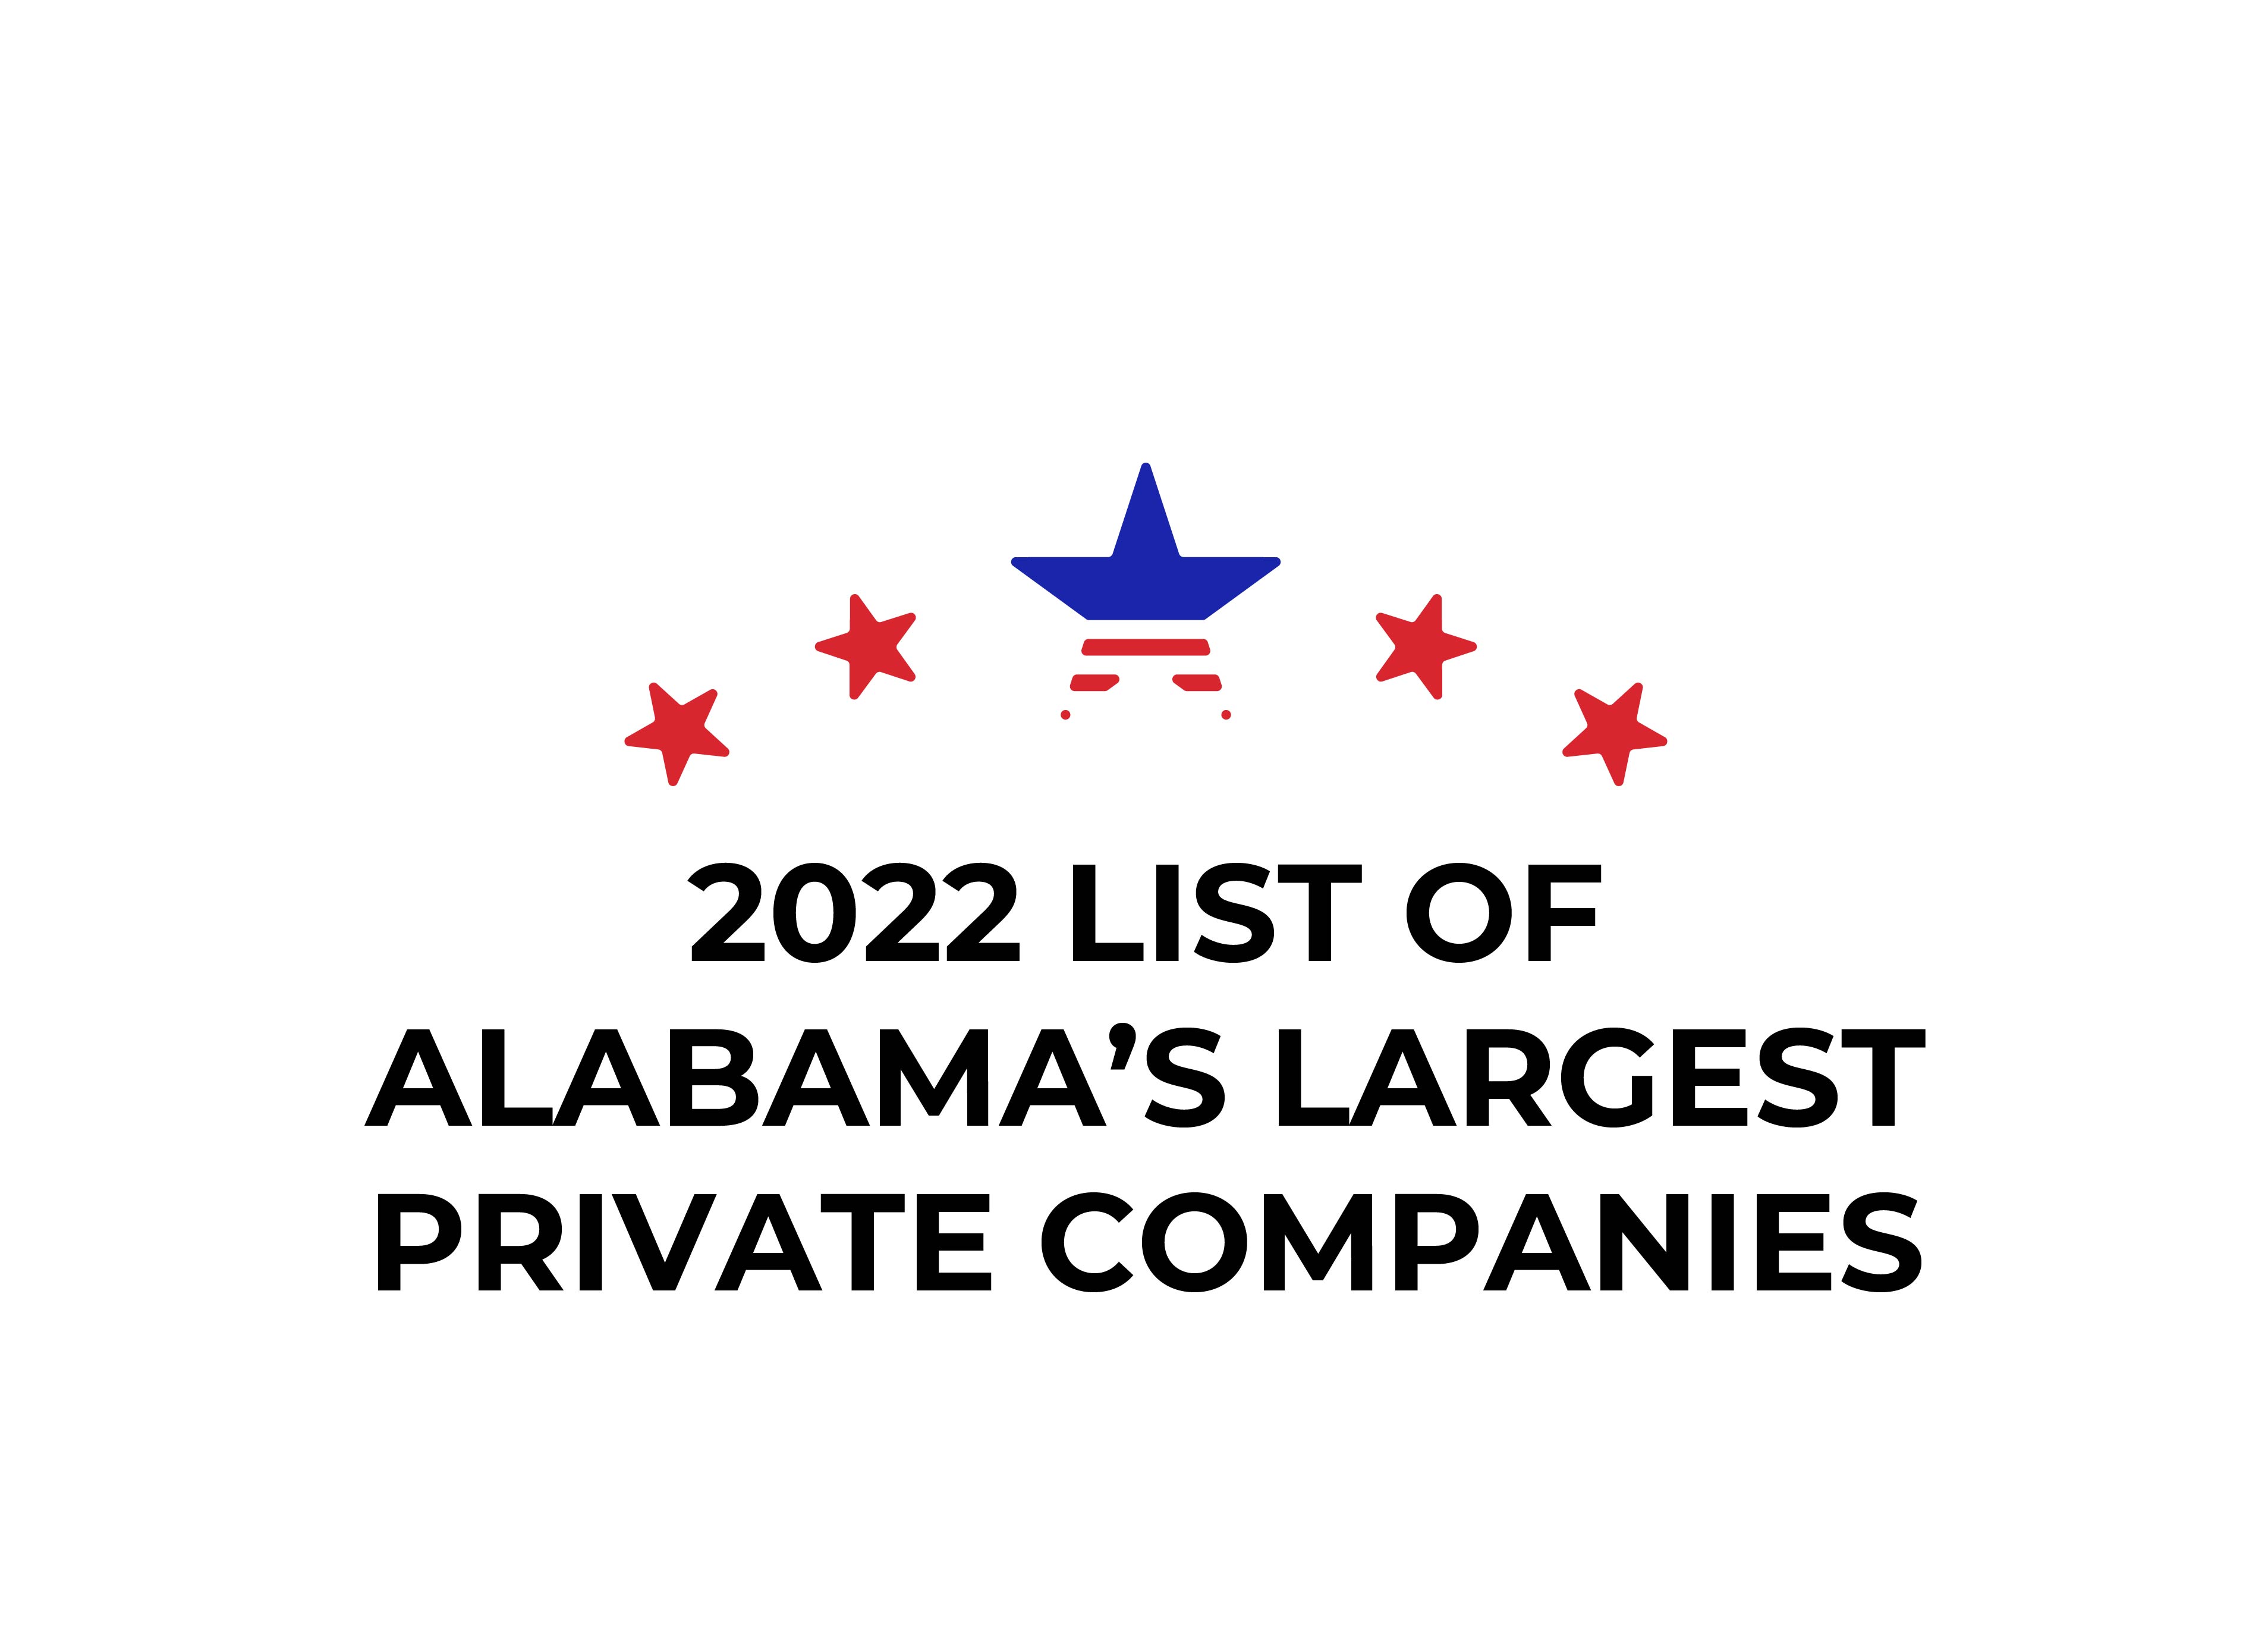 Alabama's largest private companies